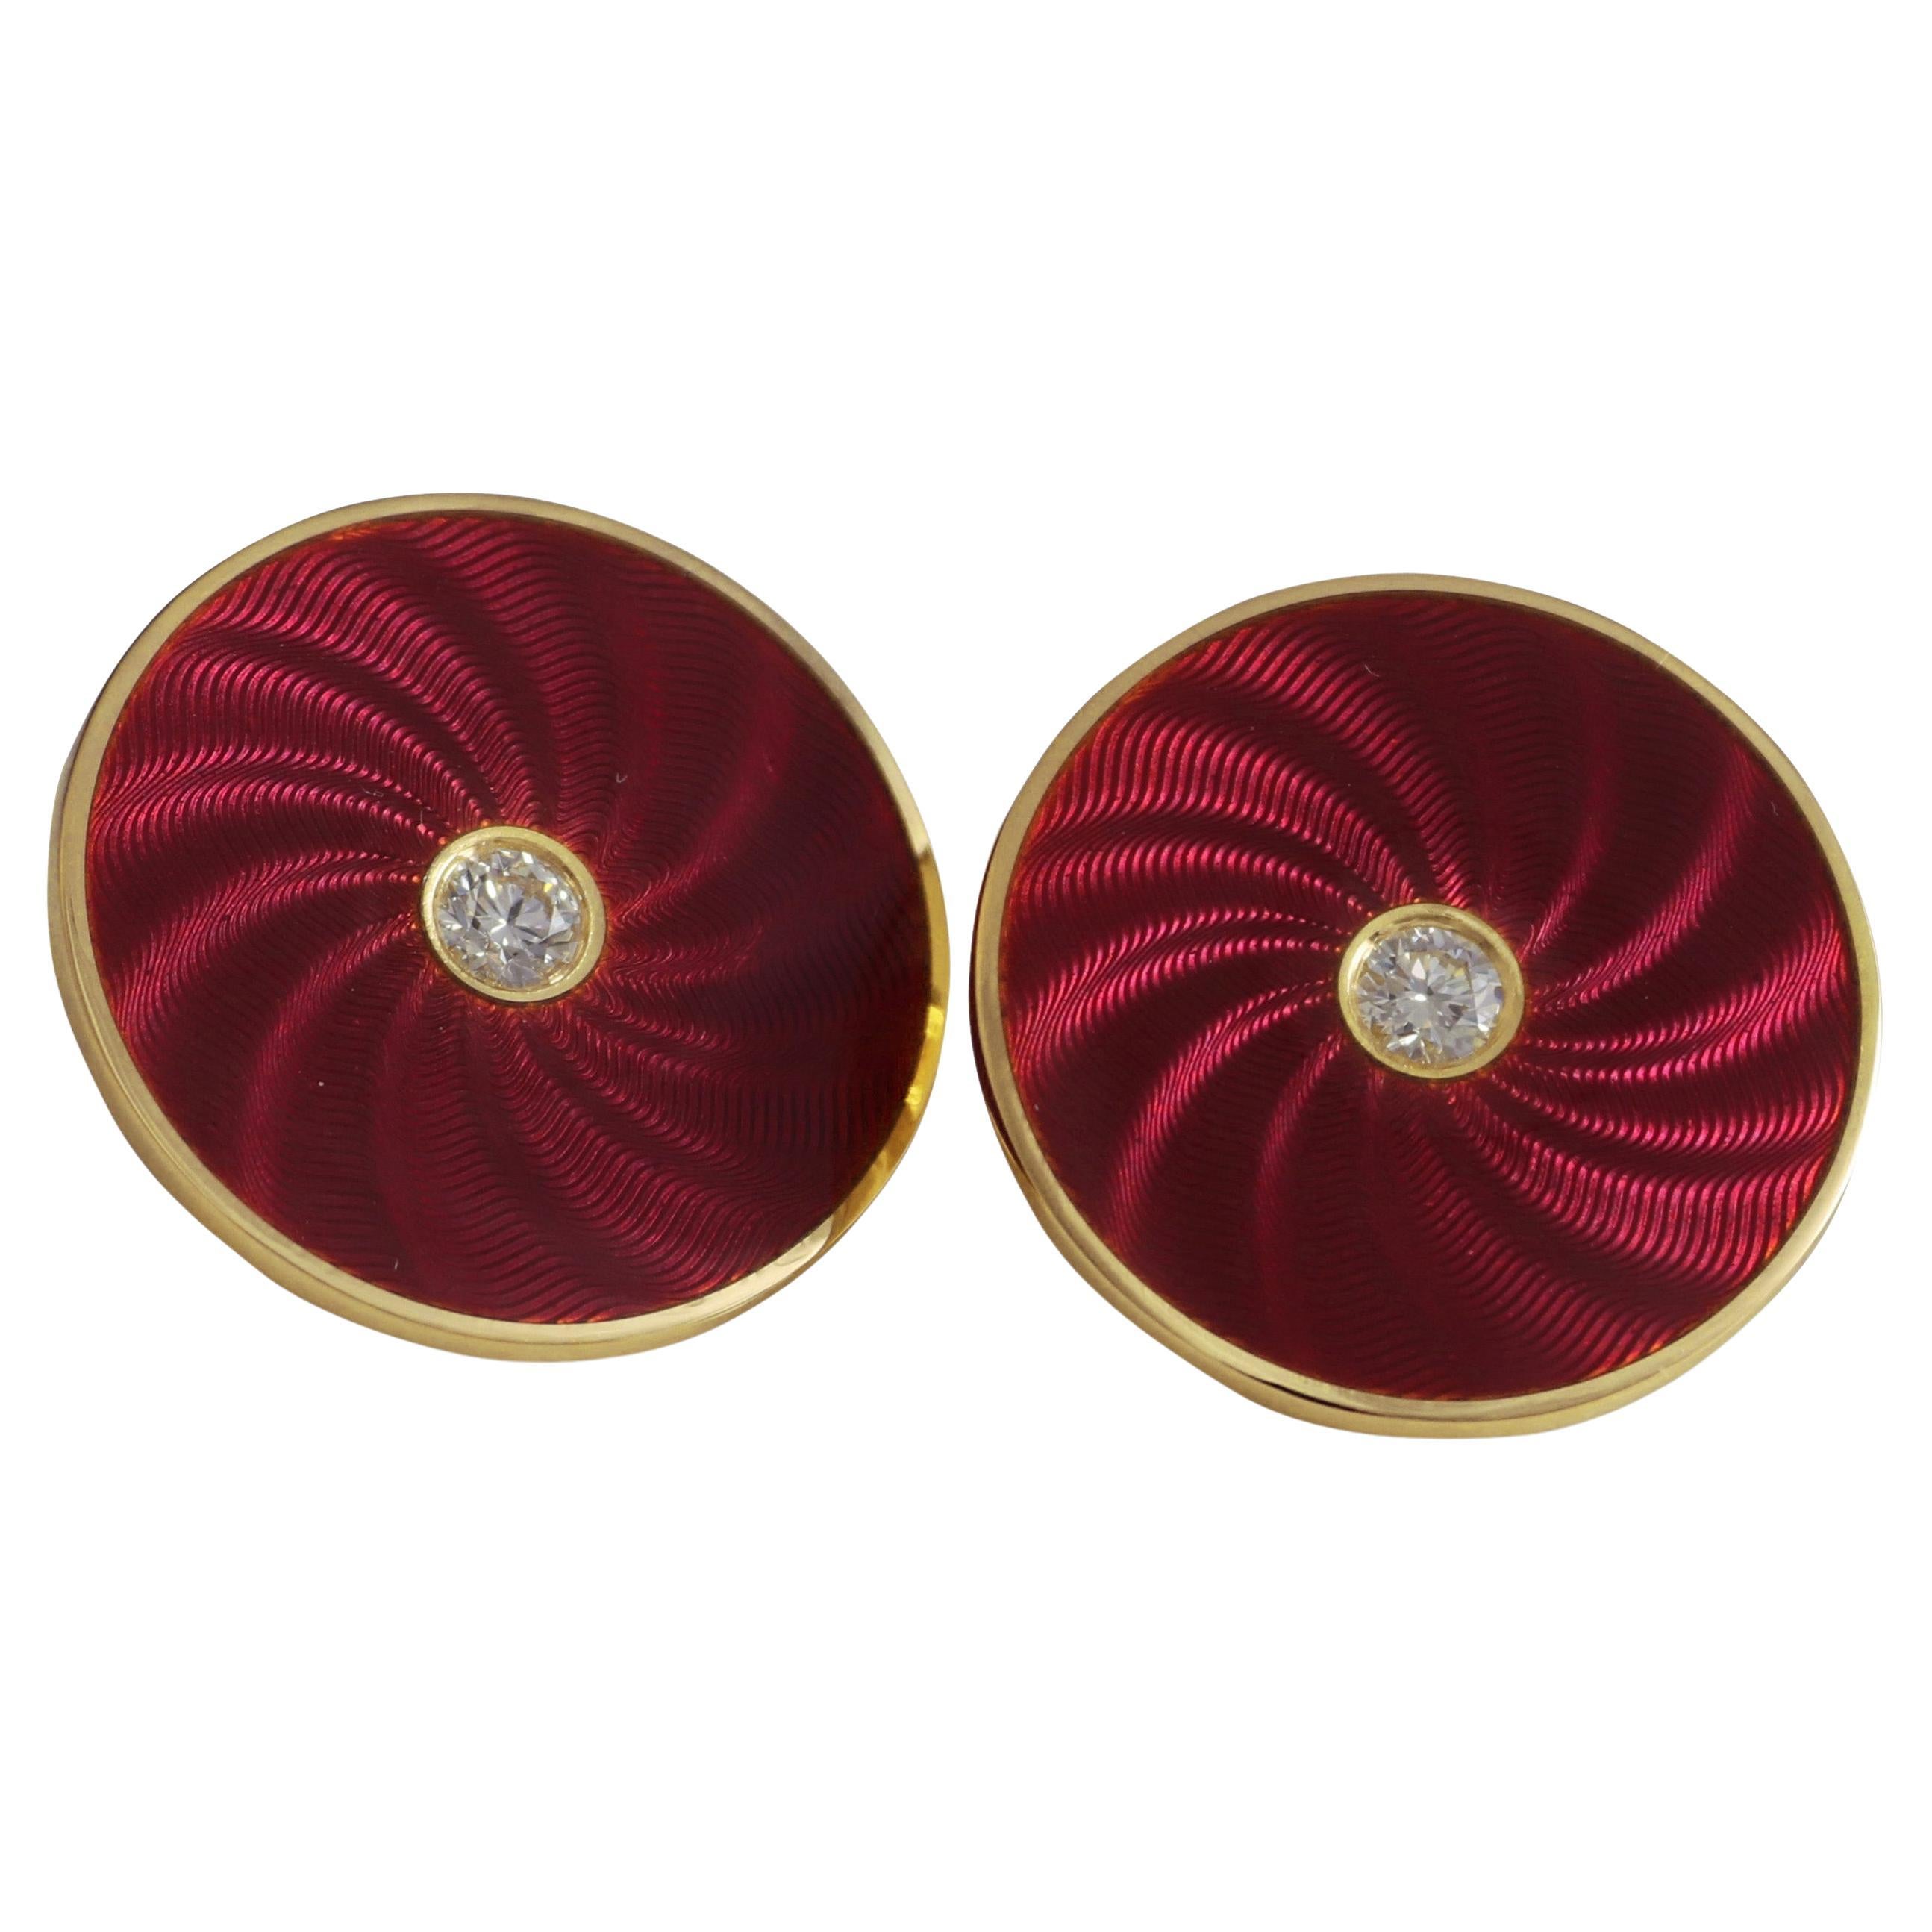 Round Victor Mayer Cufflinks, Globetrotter collection, 18k Yellow Gold, Raspberry Red Guilloche Enamel, 2 diamonds total 0.26 ct, G VS brilliant cut

Reference: V1057/RH/00/00/102
Brand: VICTOR MAYER
Collection: Globetrotter collection
Material: 18k